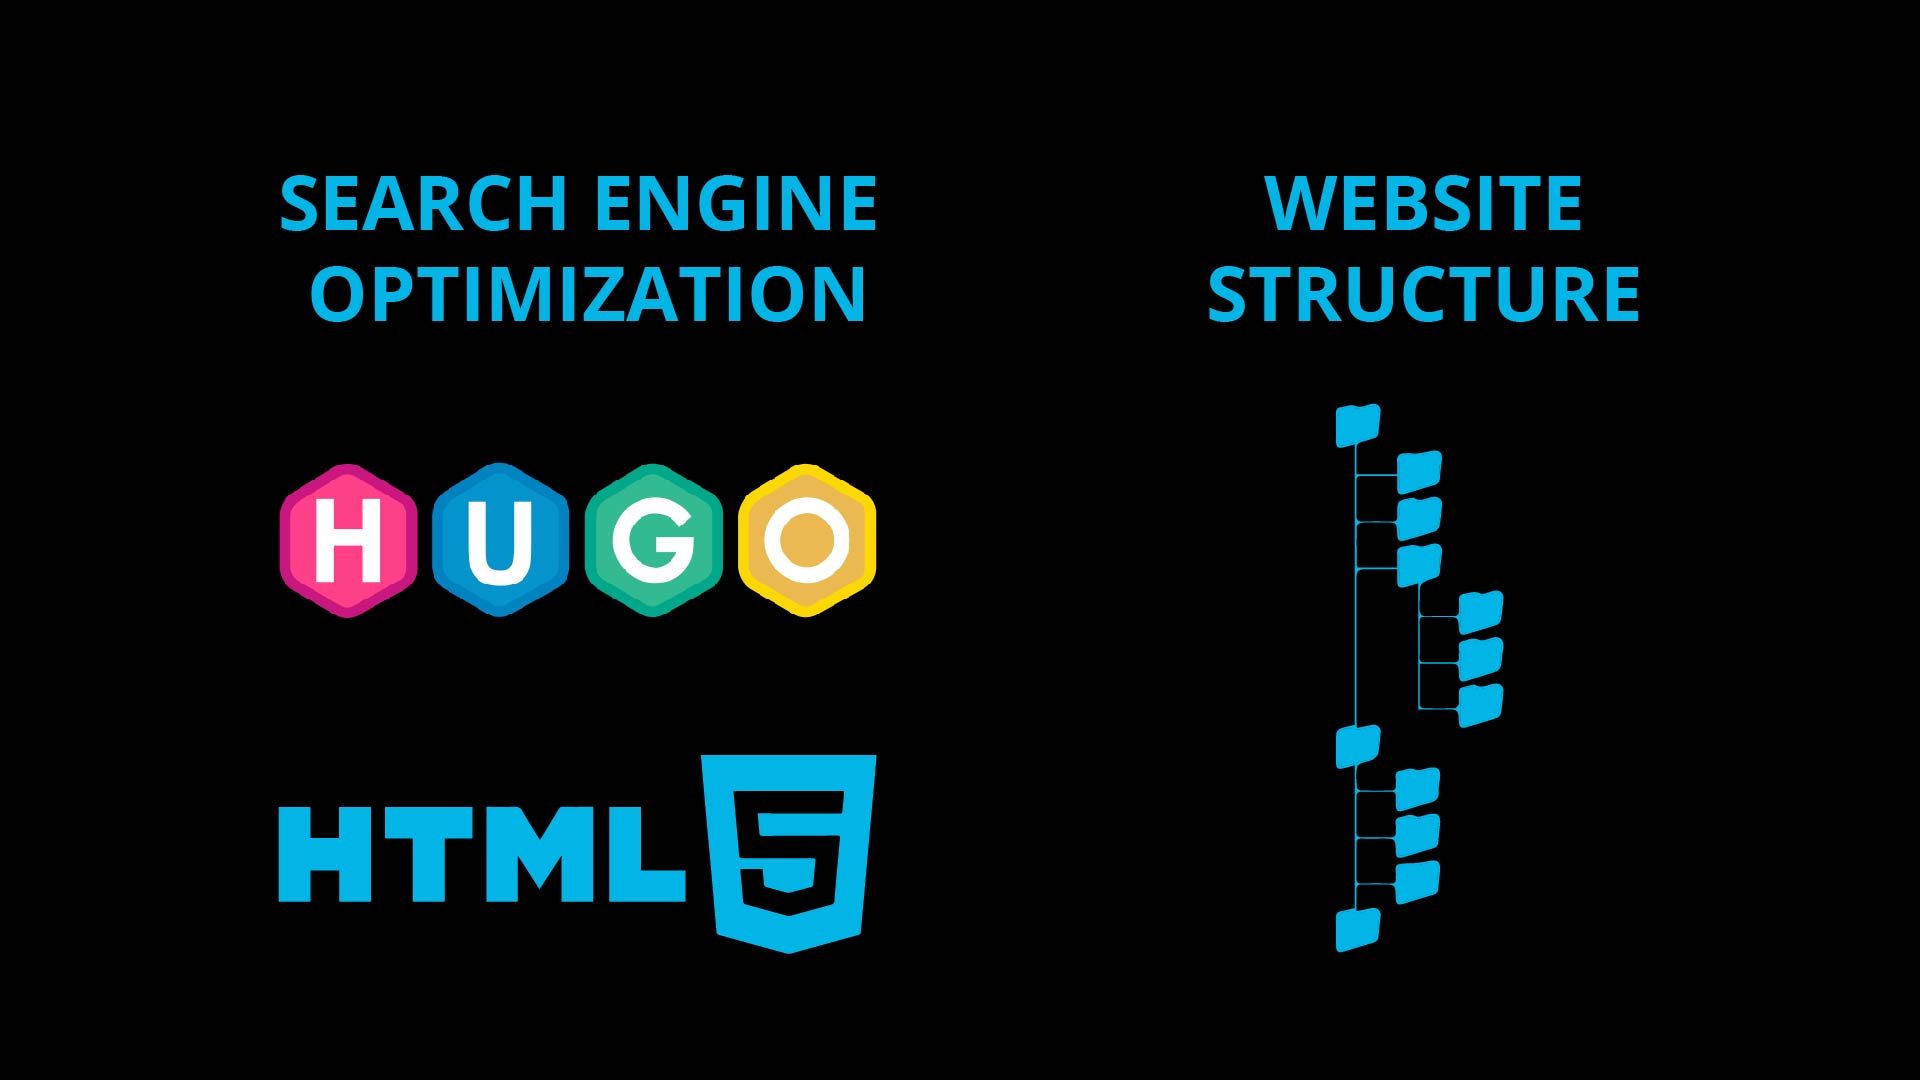 Image for SEO With Hugo (3) - Website Structures hero section